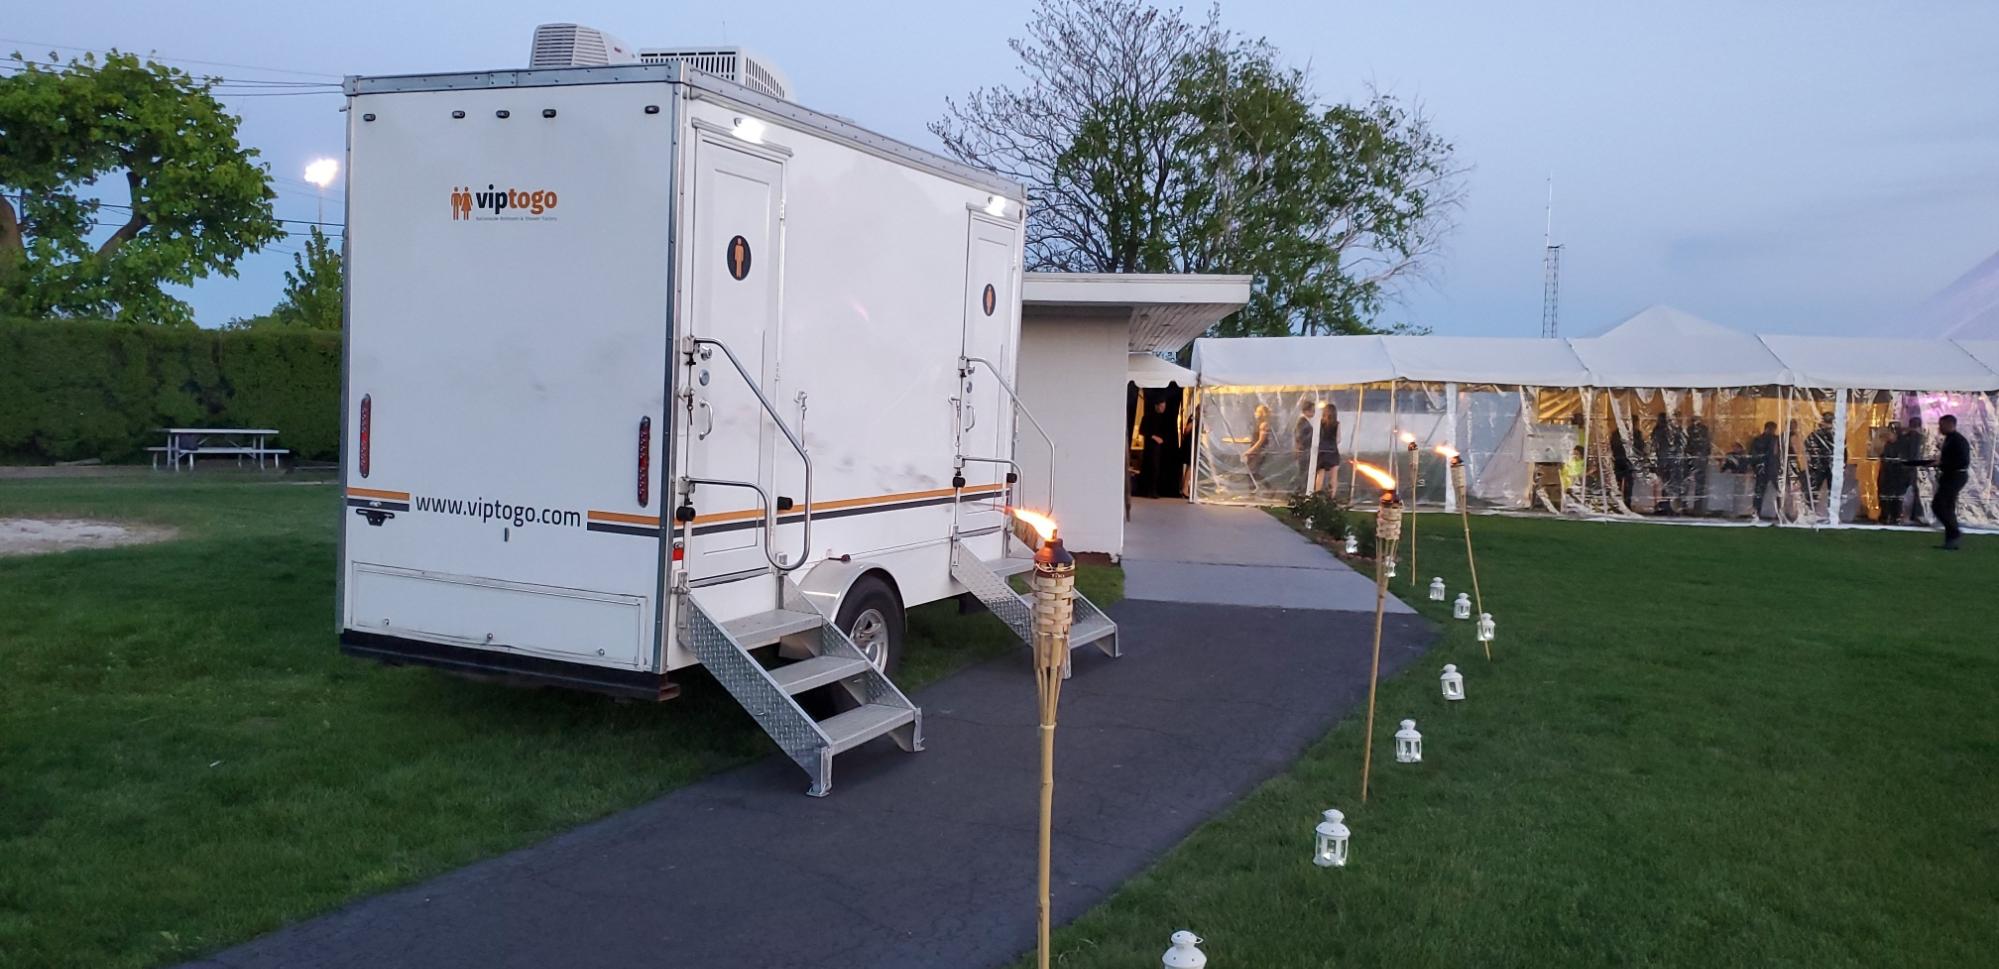 portable bathrooms at outdoor event